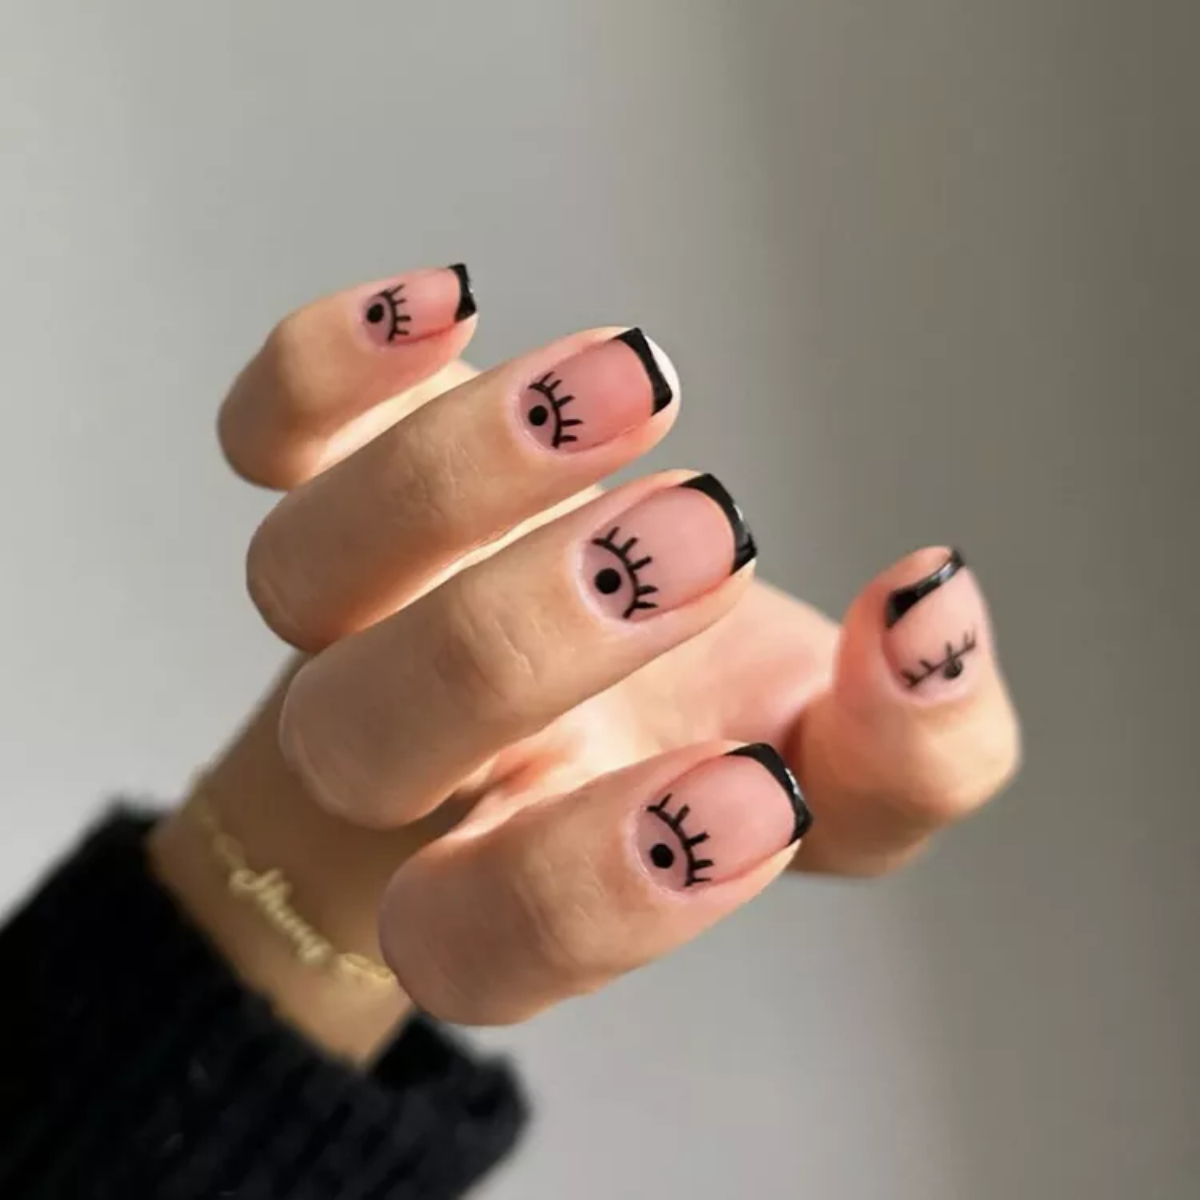 thehangedit dunkellrote french tips